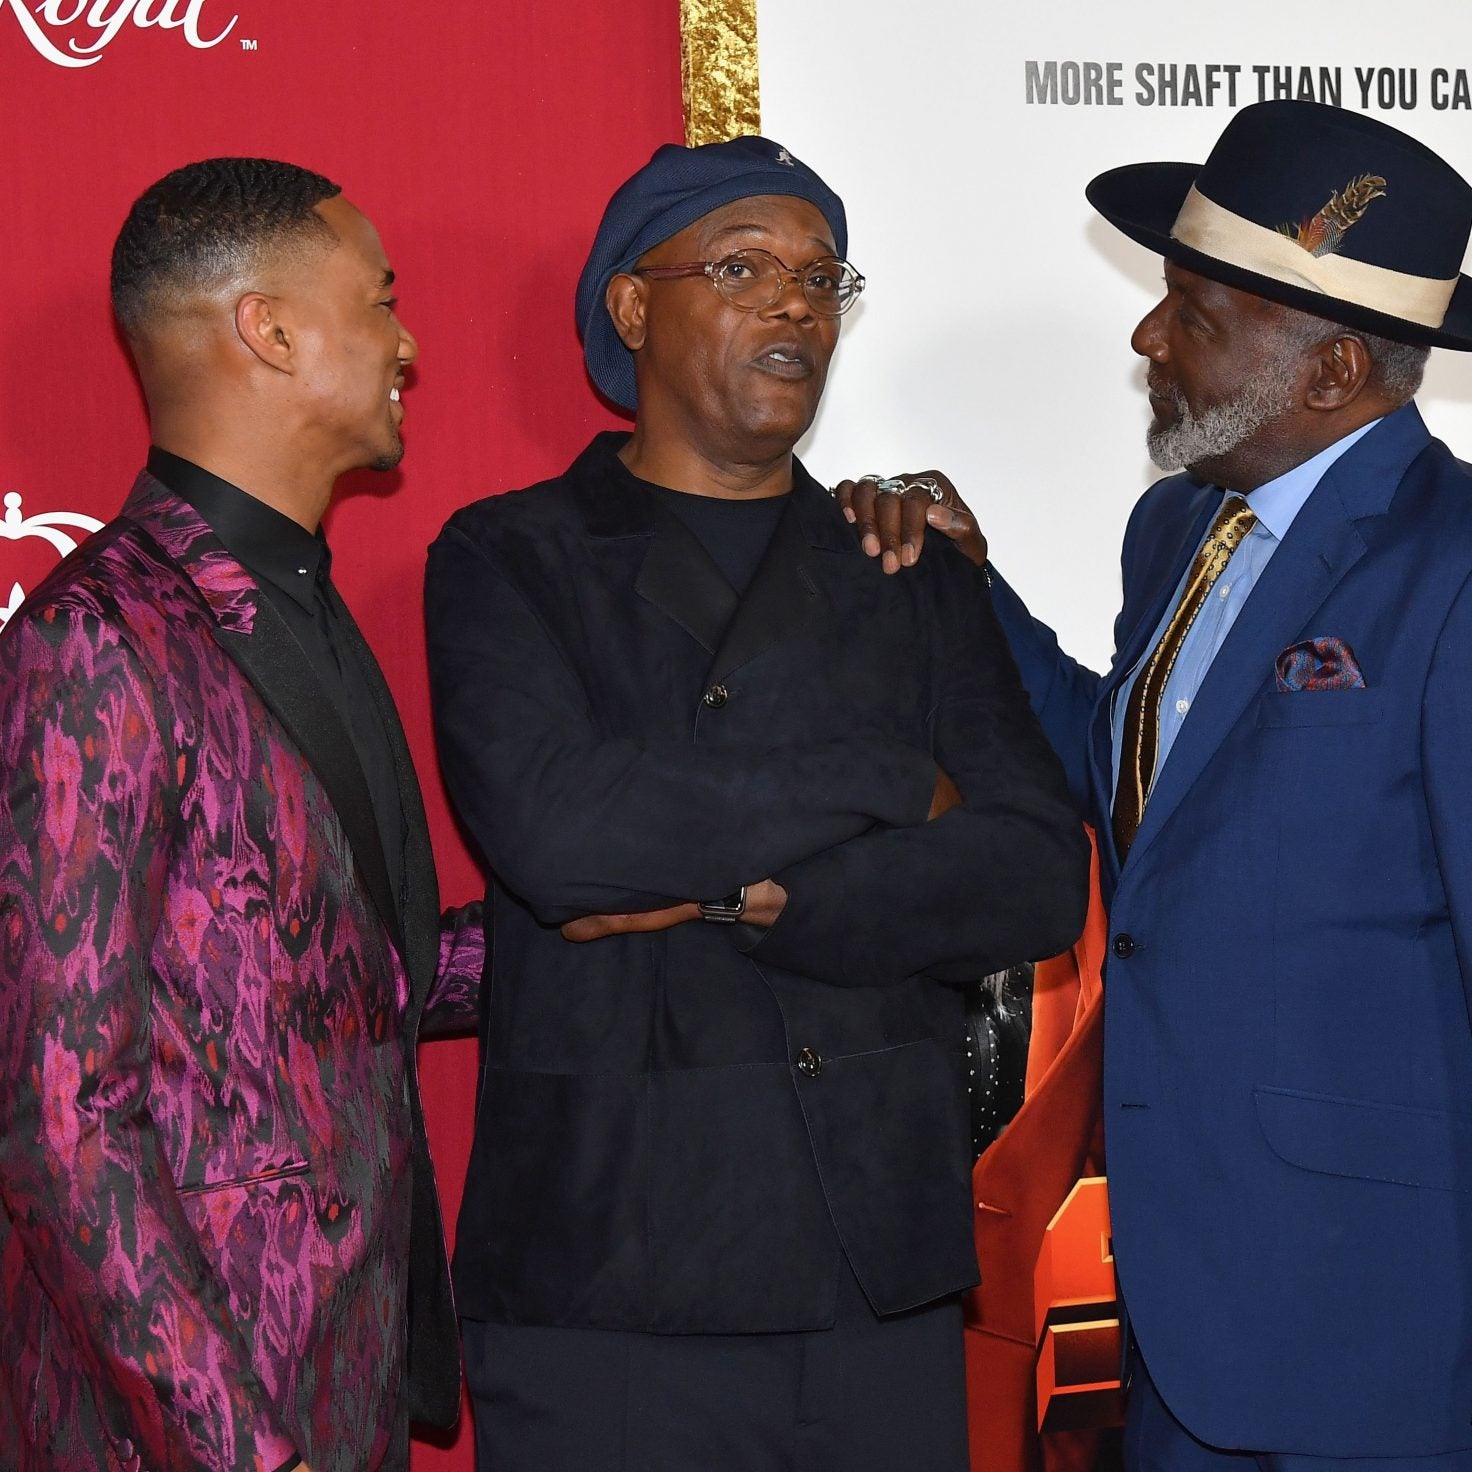 'Shaft' Star Jessie T. Usher Shares The Hilarious Story Of The First Time Samuel L. Jackson Cursed At Him